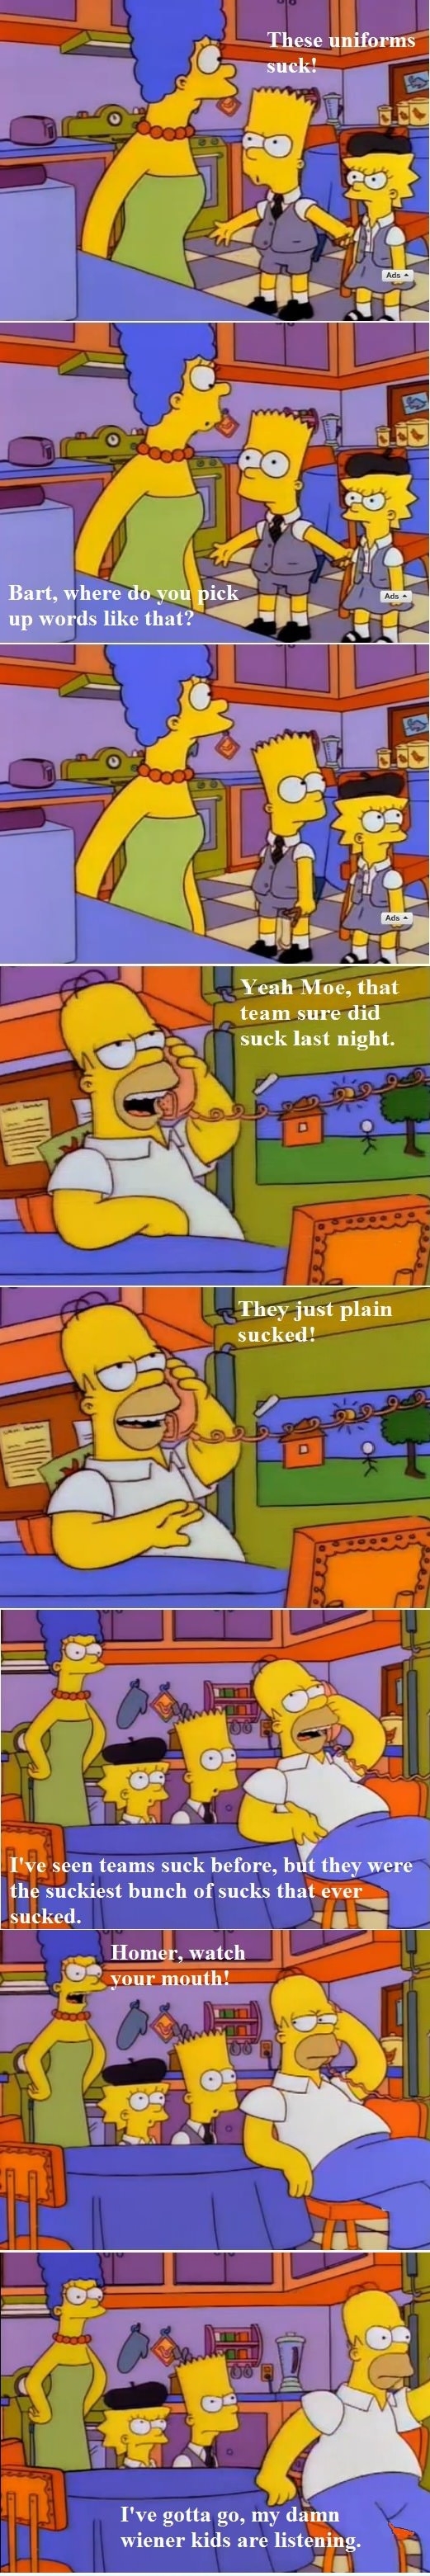 Homer, watch your mouth!